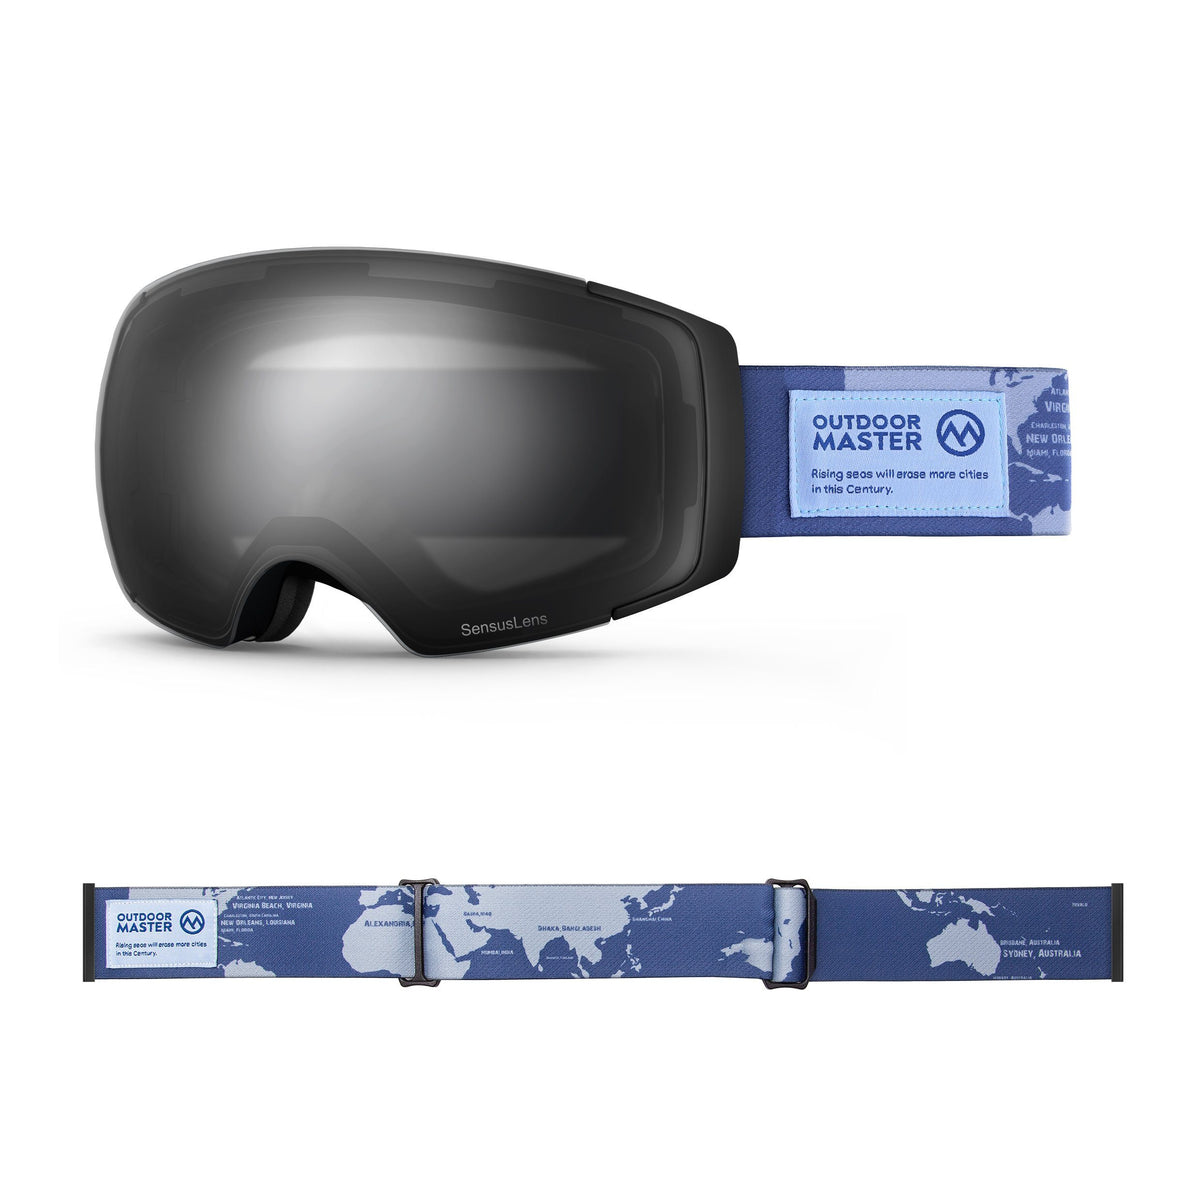 Eco-friendly Ski Goggles Pro Series - The Disappearing Places/Classic BambooStraps Limited Edition OutdoorMaster SensusLens VLT 13-60% From Light to Dark Grey The Disappearing Places